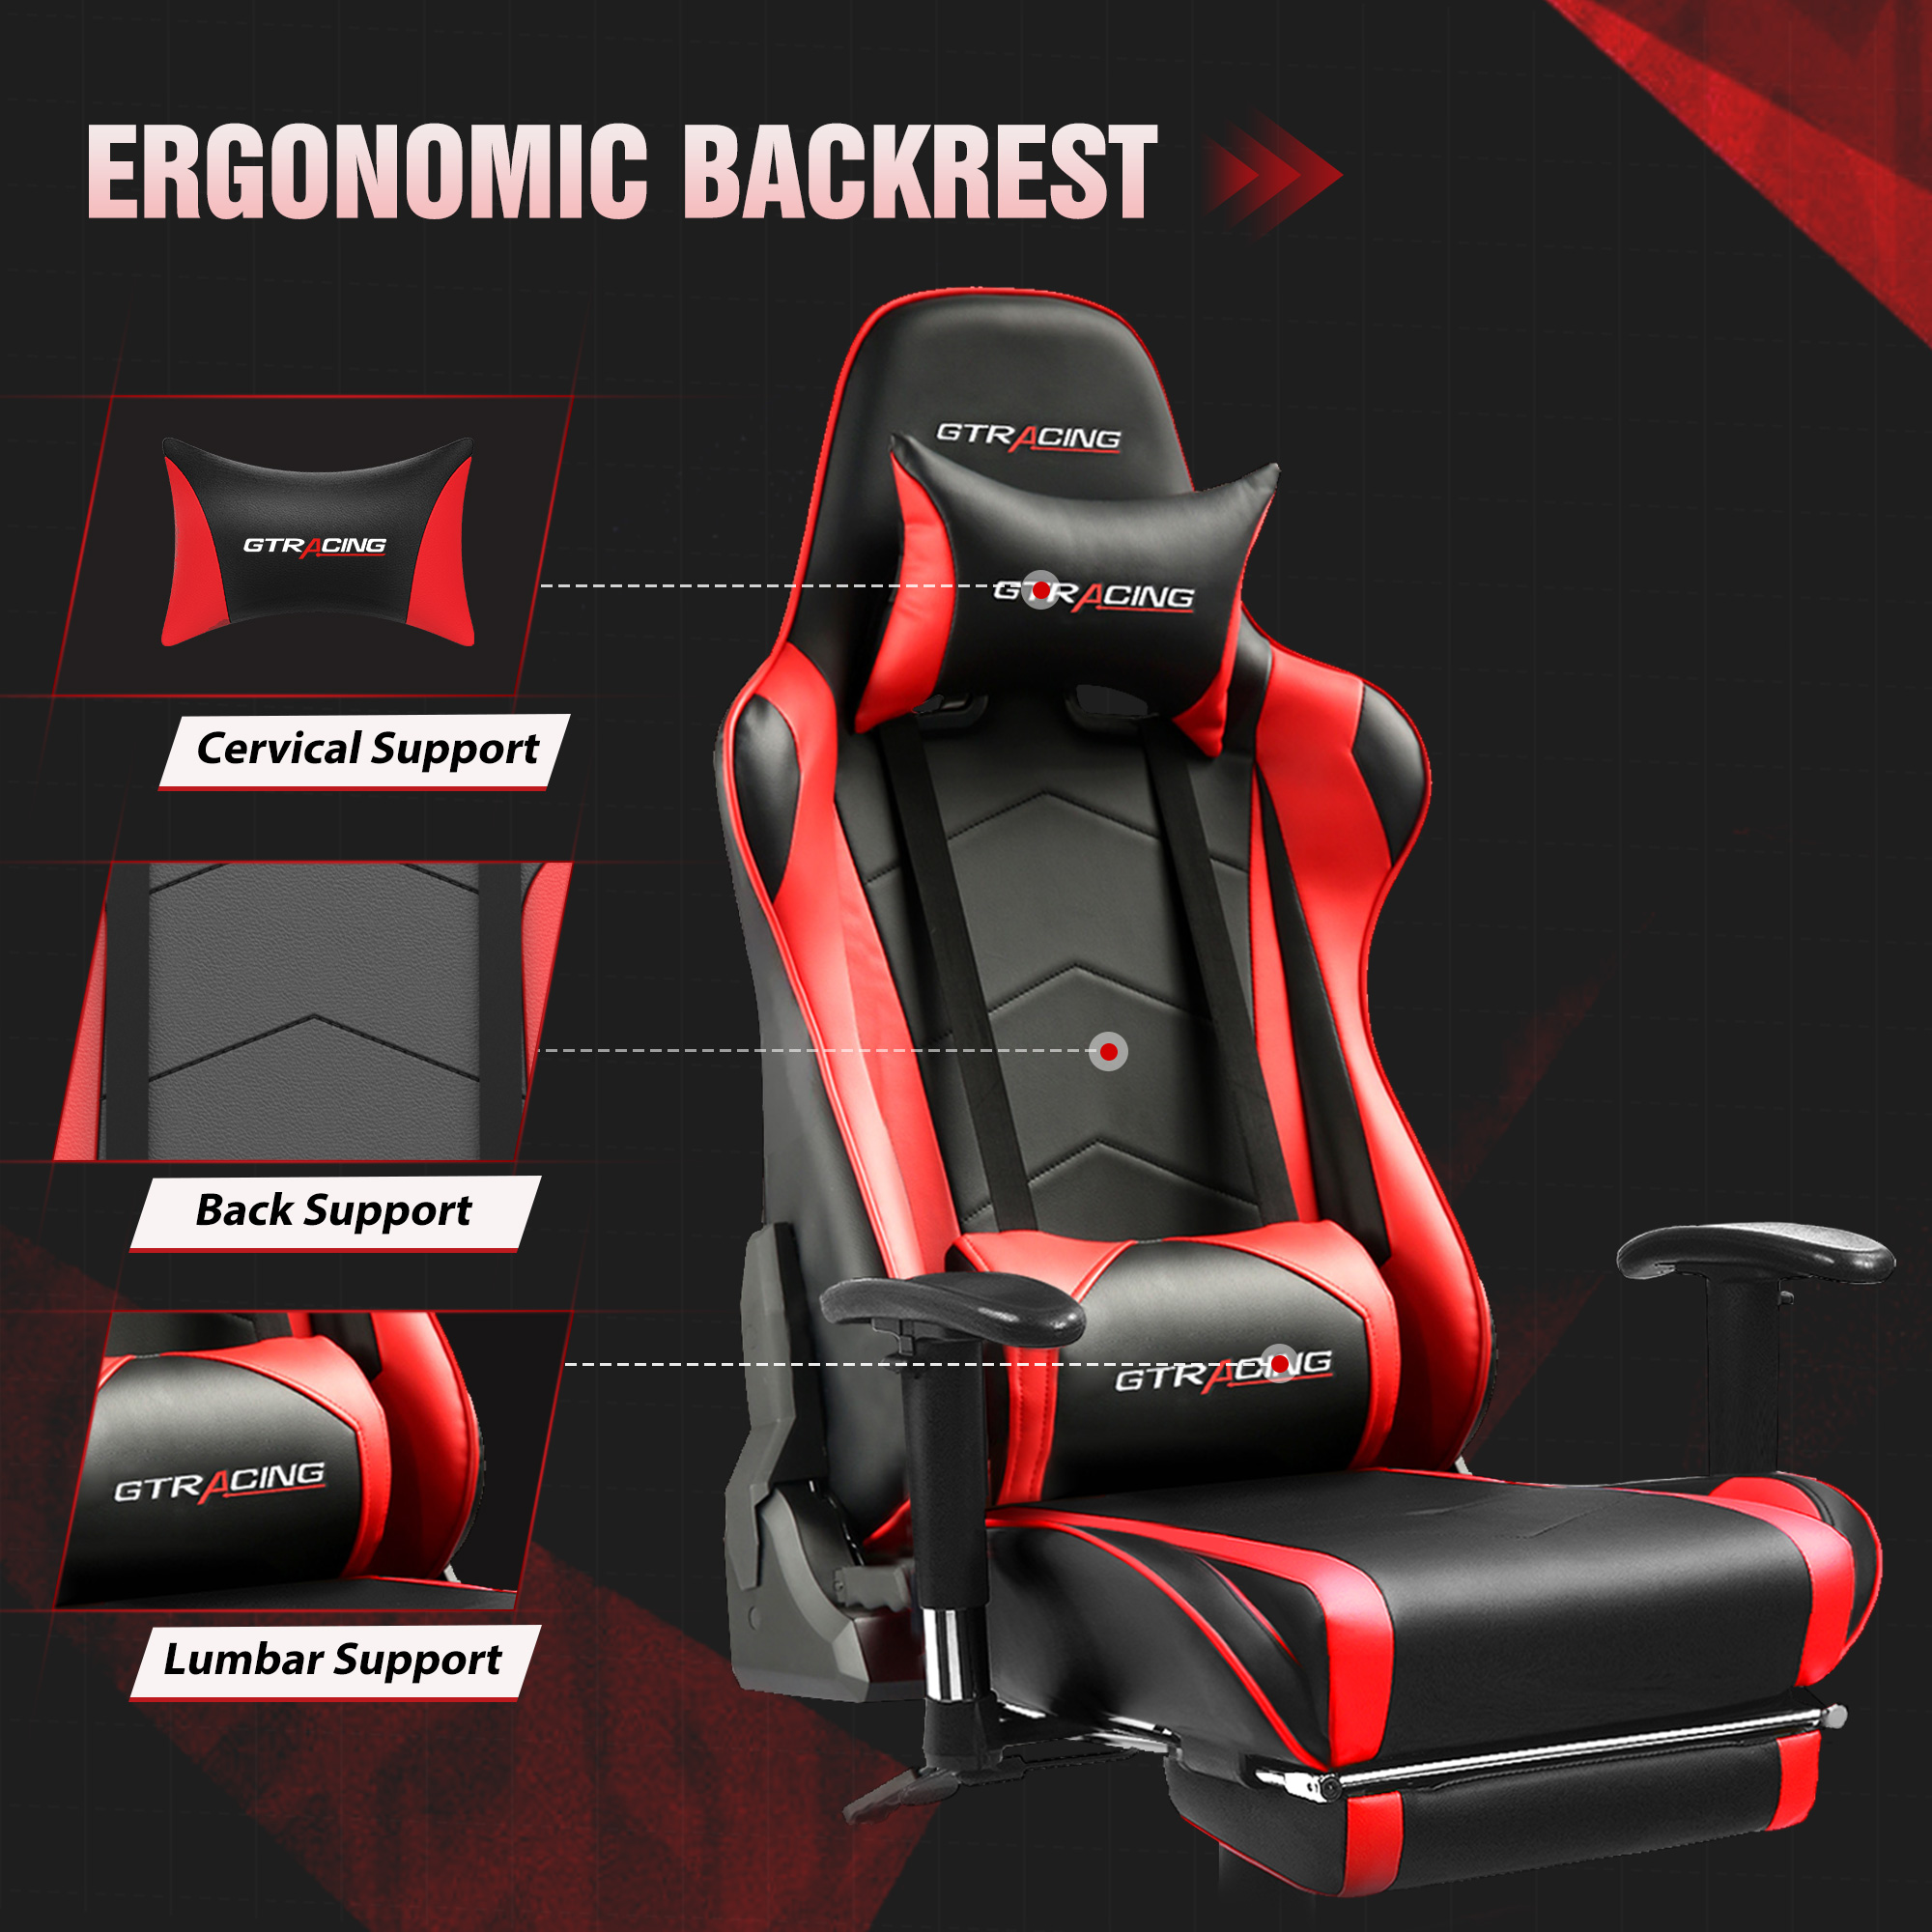 GTRACING Gaming Chair Office Chair PU Leather with Footrest & Adjustable Headrest, Red - image 3 of 6